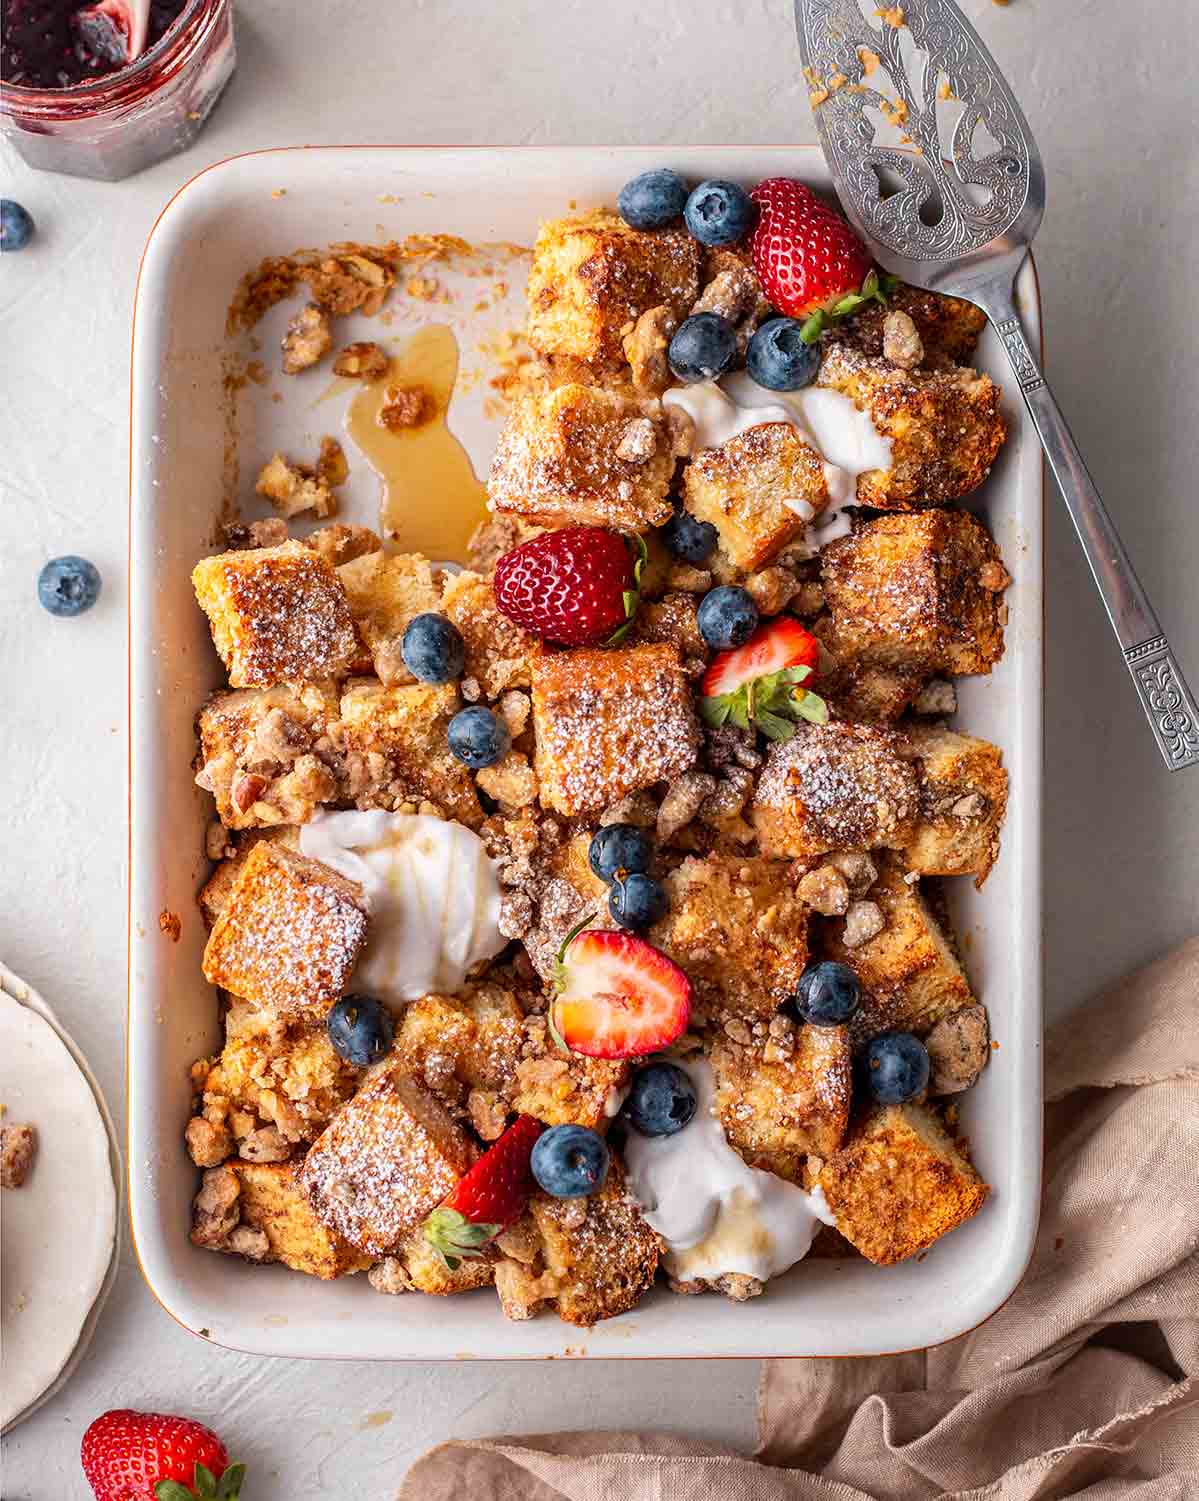 Vegan french toast cubes baked in a casserole dish. The dish is dusted with powdered sugar and is topped with a pecan crumble, berries and cream.